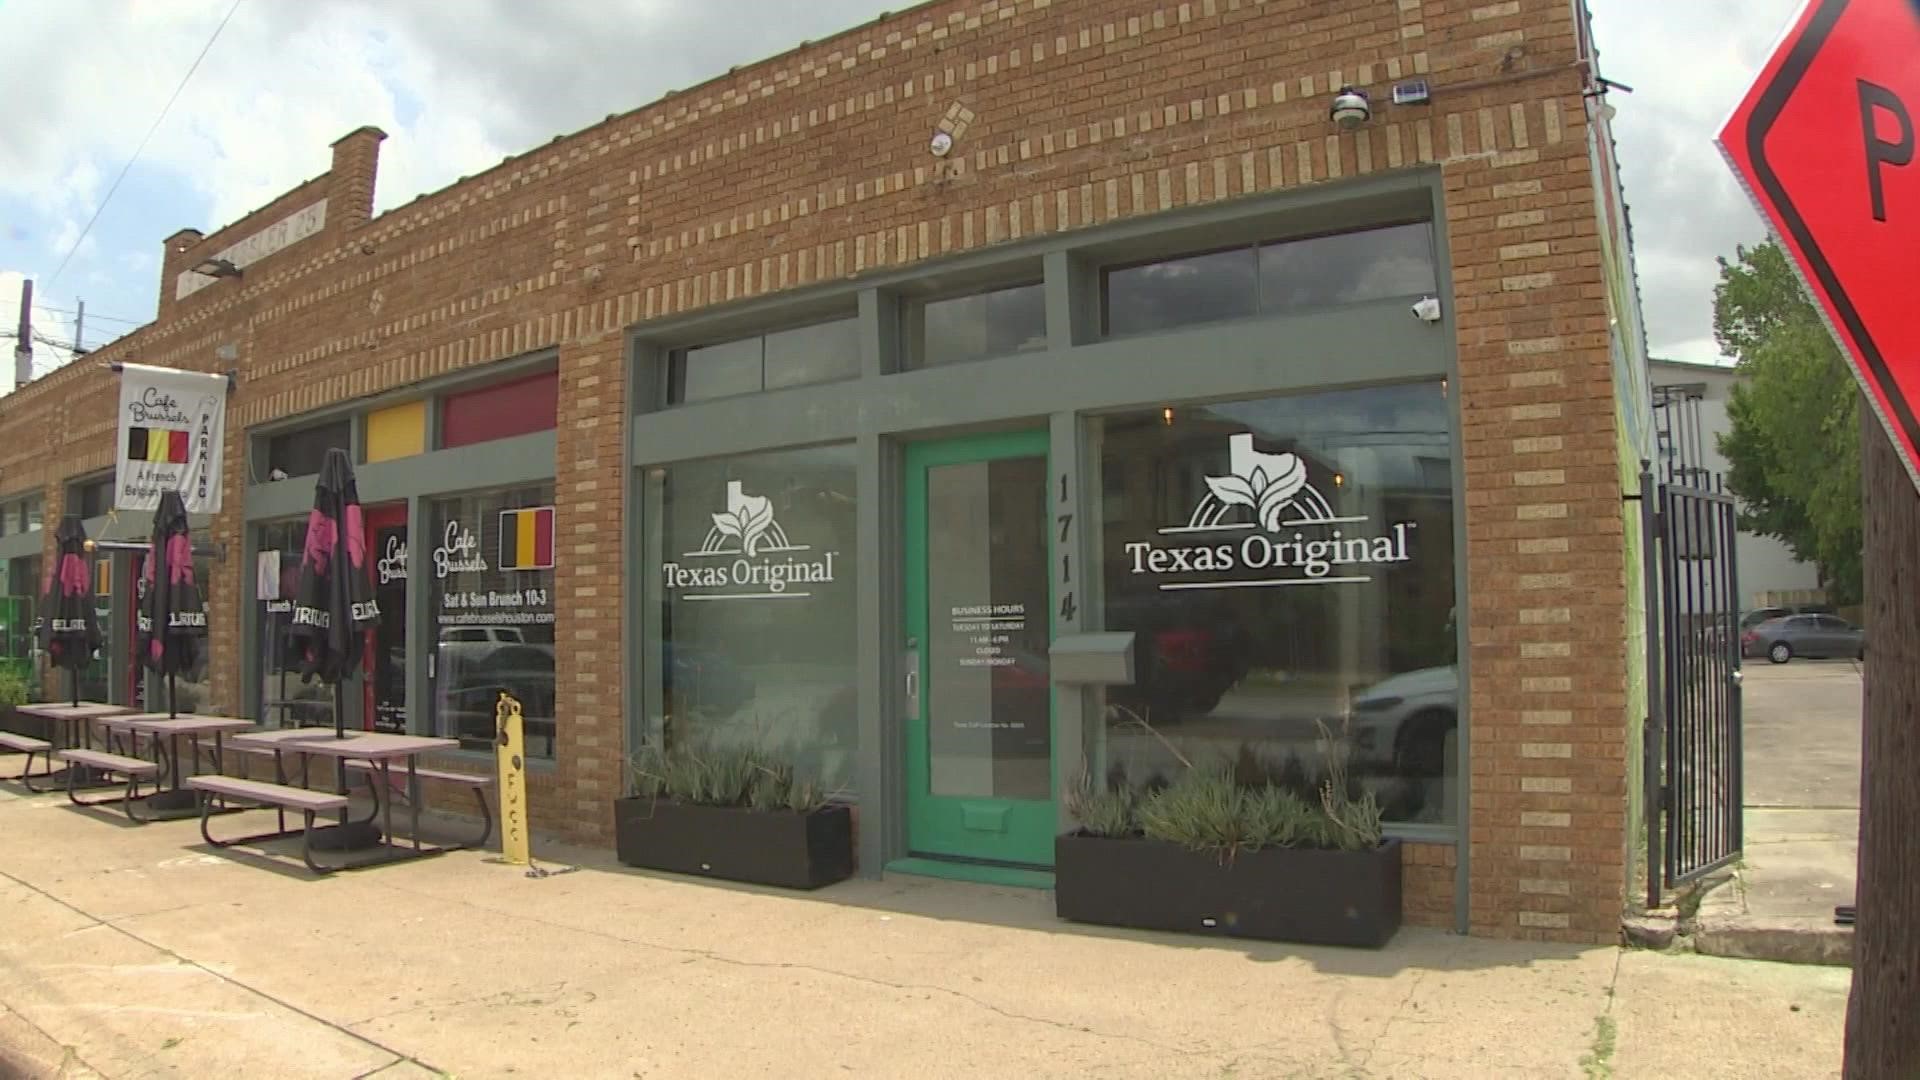 Texas Original is one of a handful of companies legally allowed to sell medical cannabis in the state.